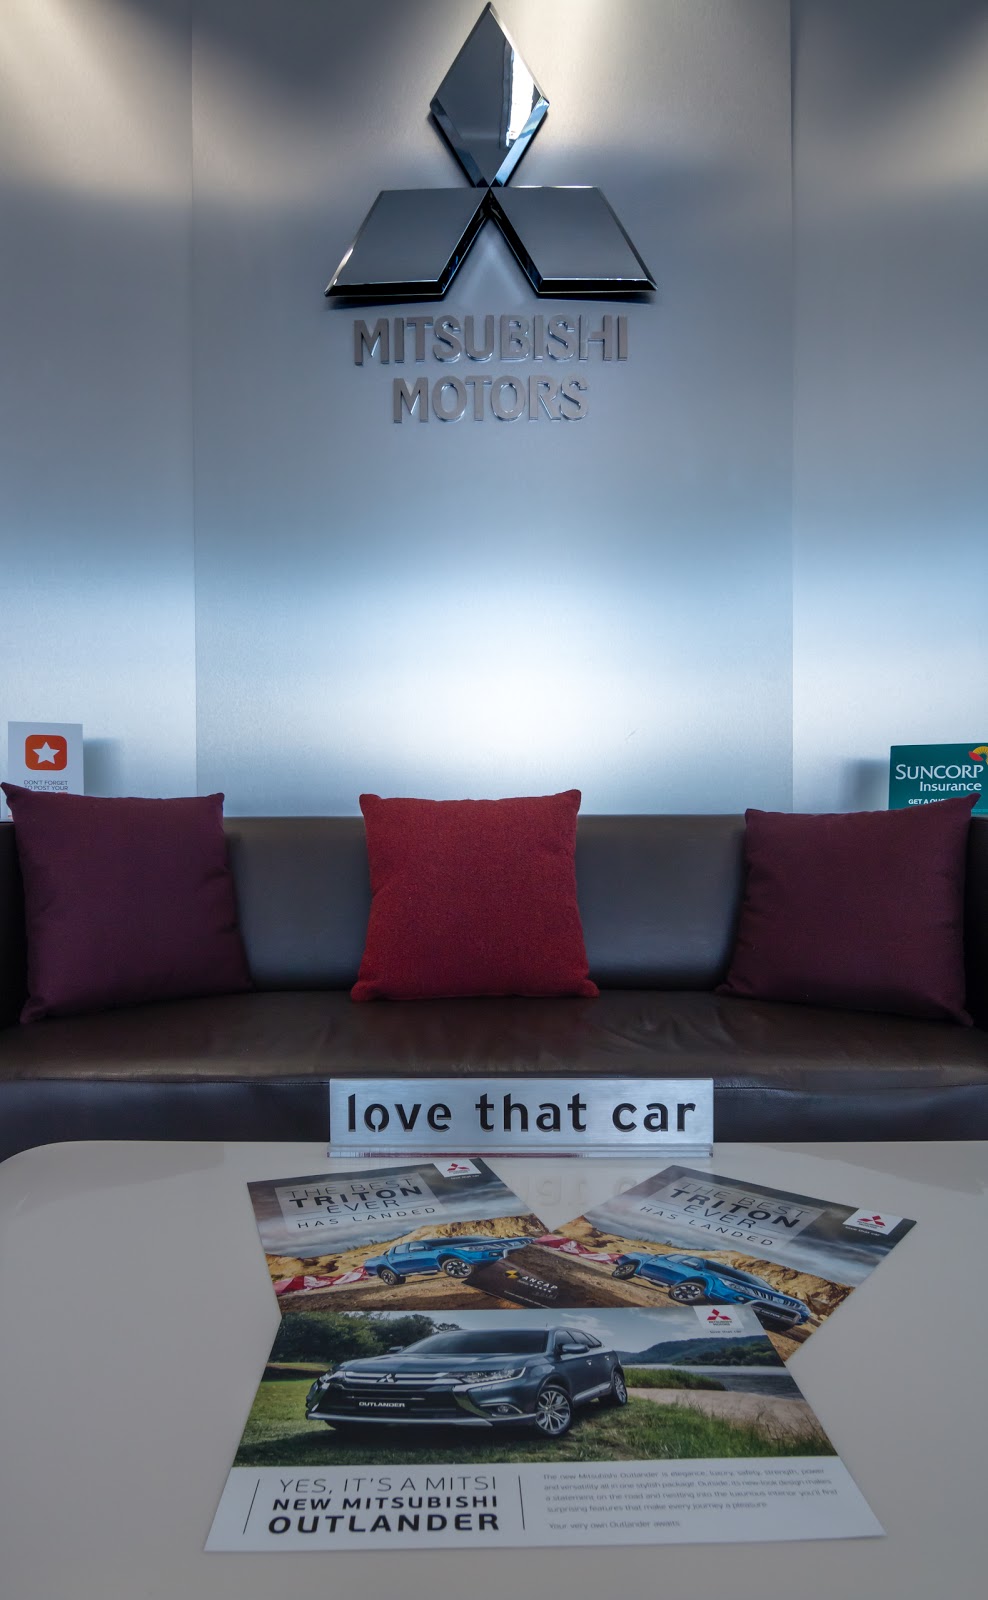 Booths Mitsubishi Sales - North Gosford | car dealer | 460 Pacific Hwy, Wyoming NSW 2250, Australia | 0243217766 OR +61 2 4321 7766